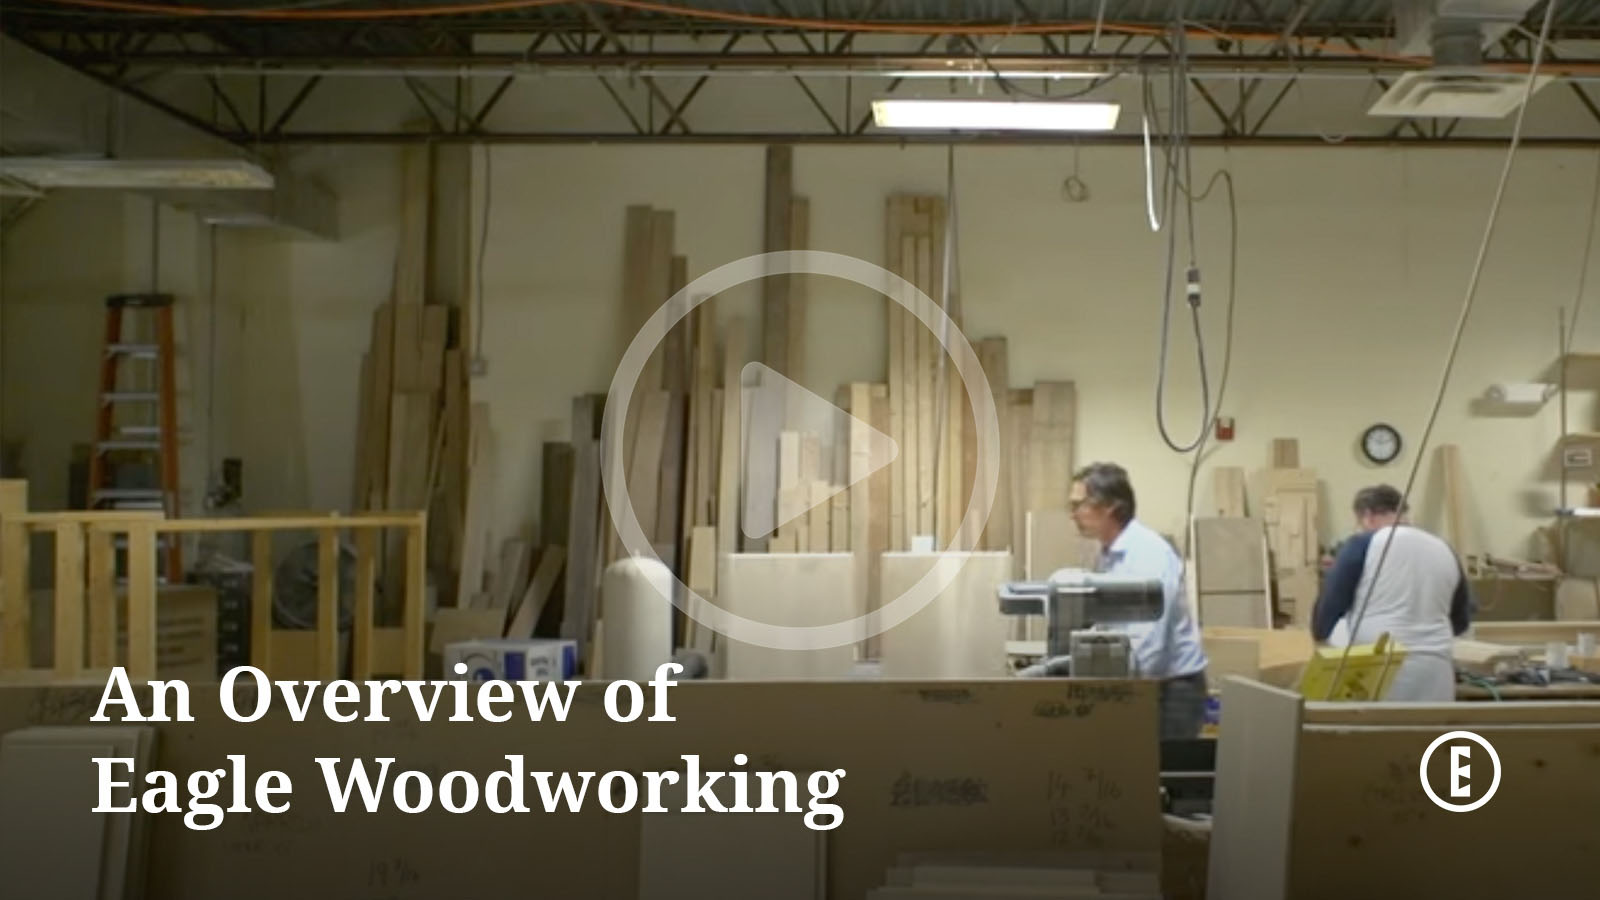 Video: An Overview of Eagle Woodworking